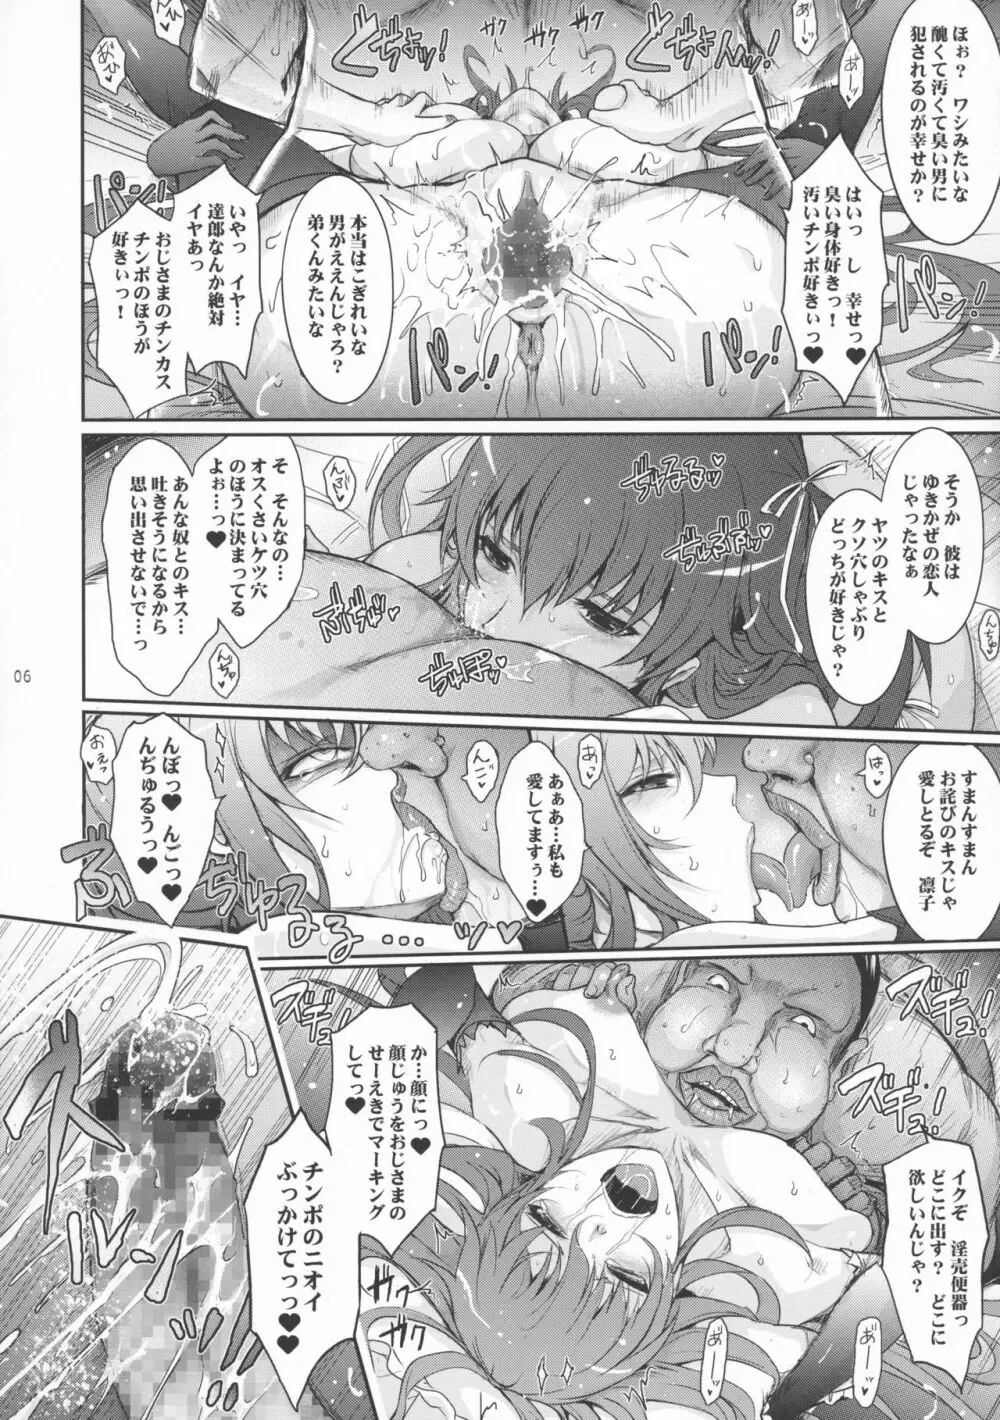 TENTACLES 隷嬢秋山凛子の蜜箱 Page.6